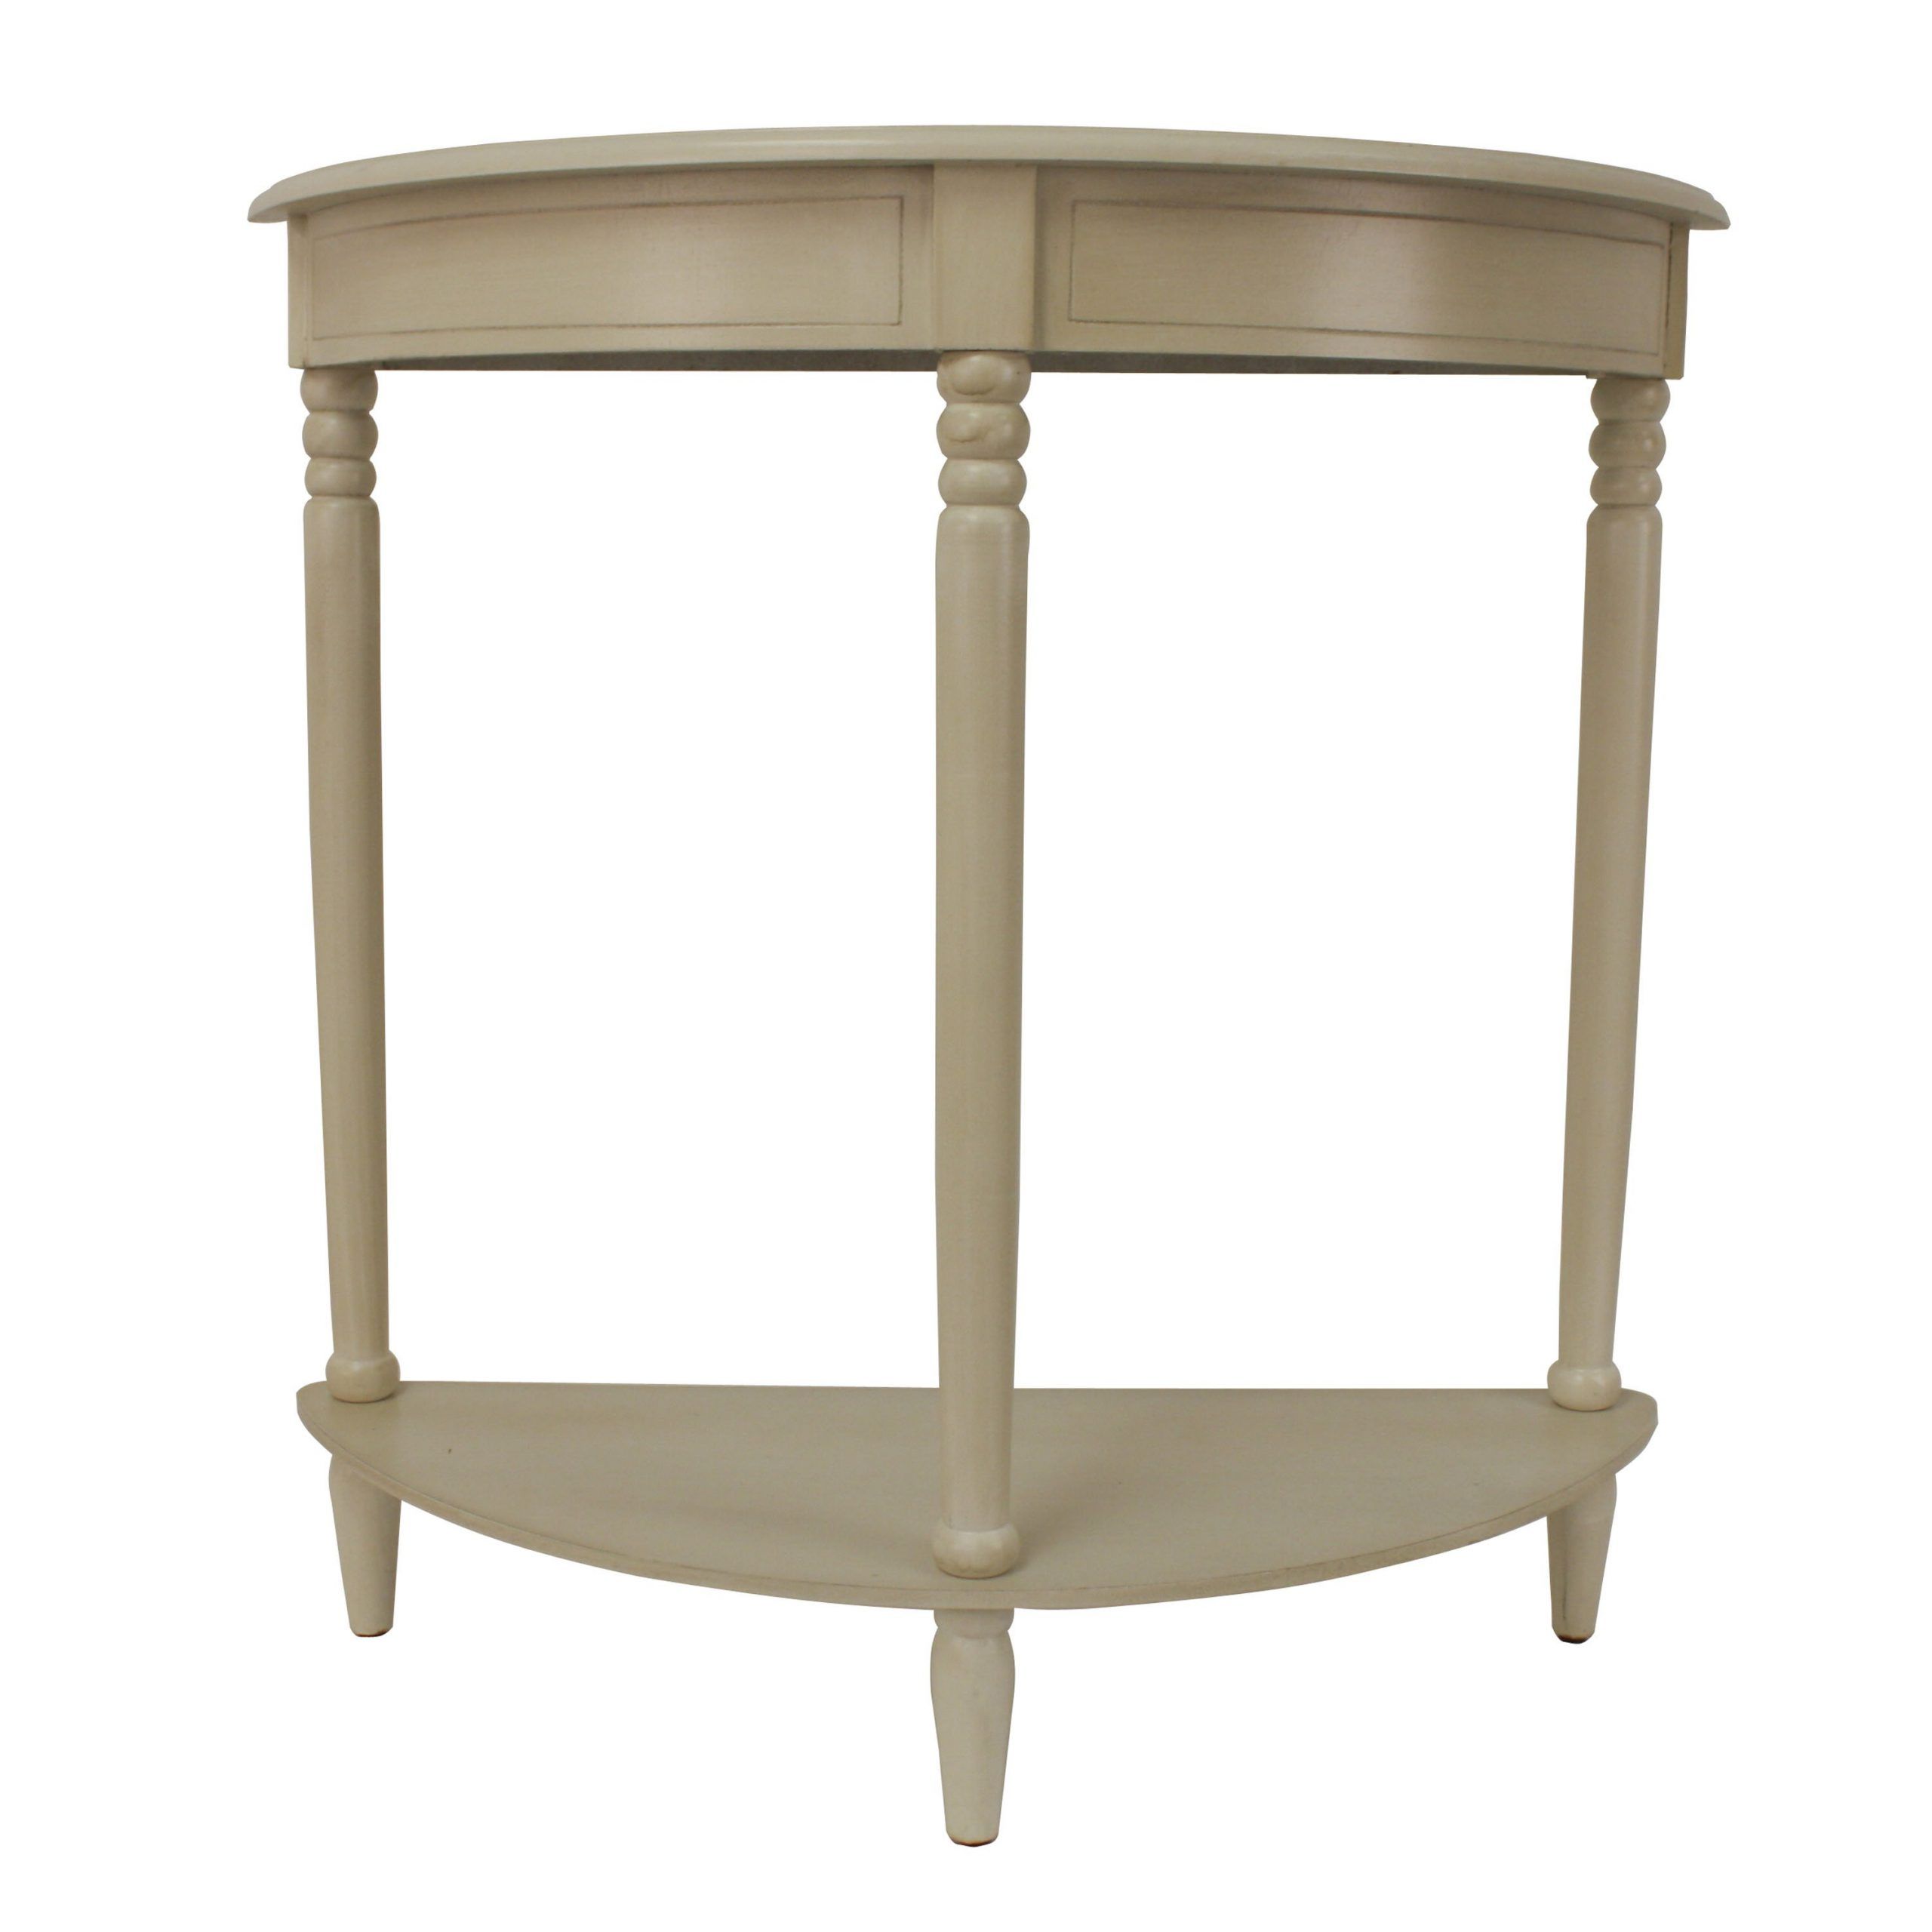 Decor Therapy Simplicity Half Moon Console Table & Reviews Pertaining To Well Liked Round Console Tables (View 10 of 10)